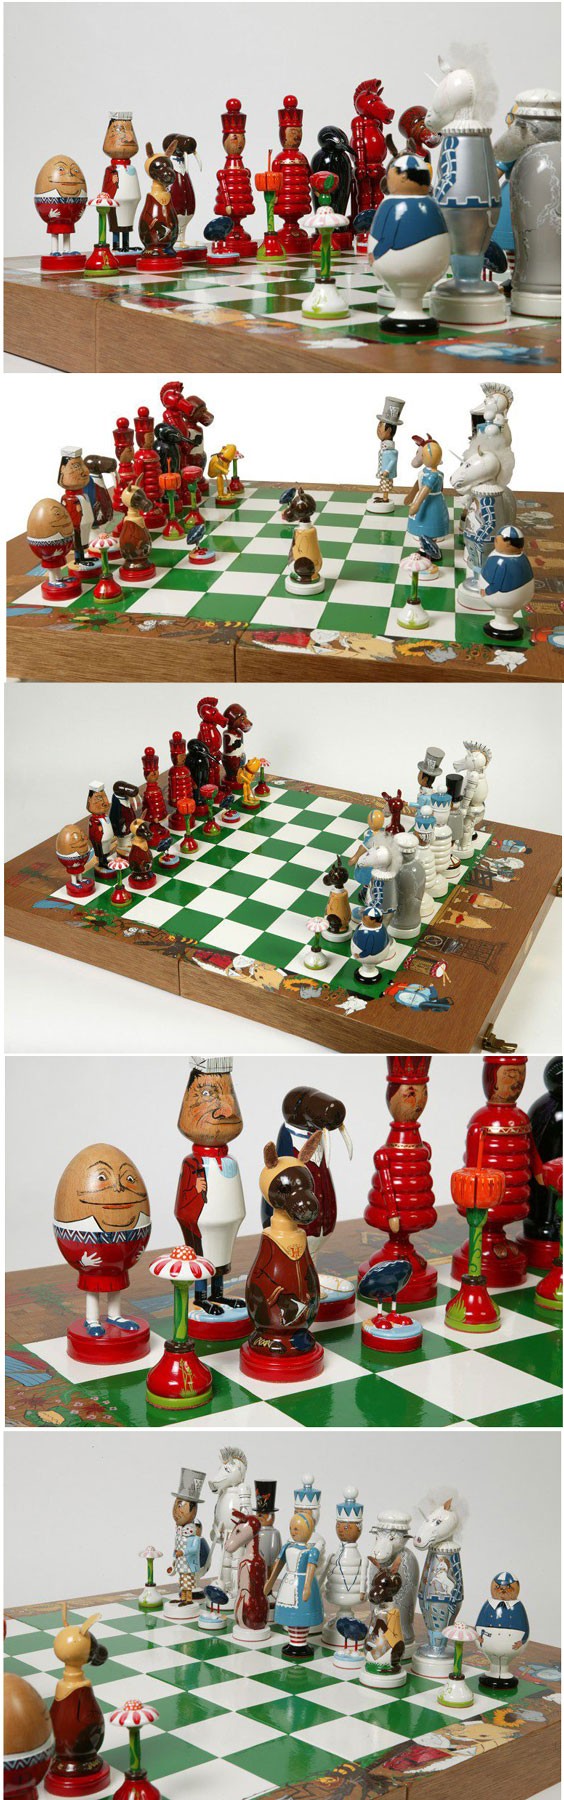 Papercraft Chess Alice Through the Looking Glass Chess Set